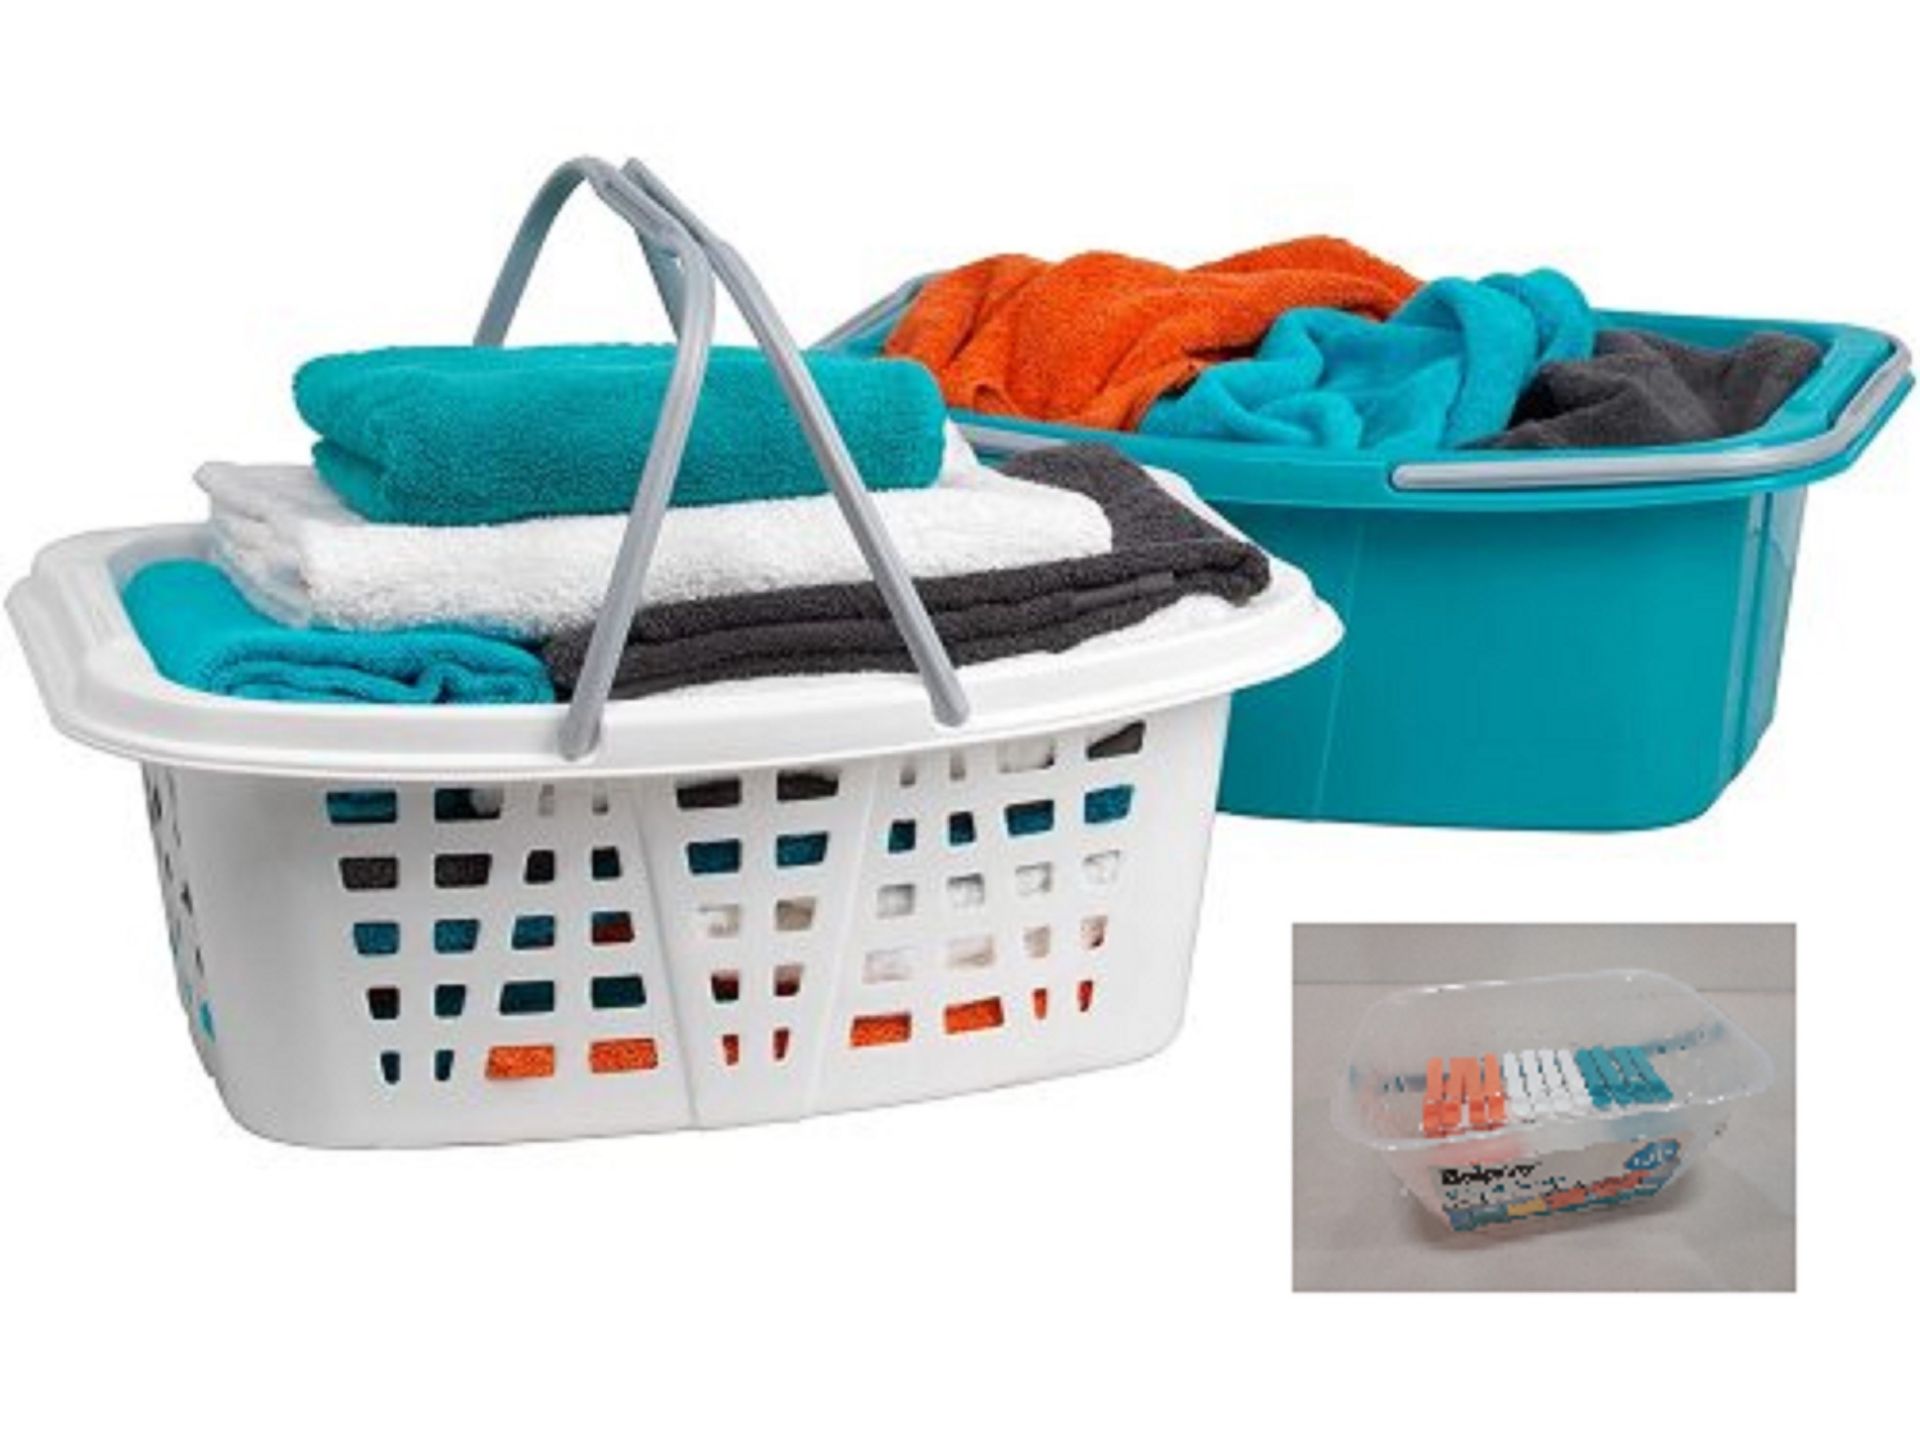 12 X BRAND NEW BELDRAY TURQUOISE / WHITE SETS OF 2 LAUNDRY BASKETS (51 X35 X 20 CM DEEP) PLUS 48